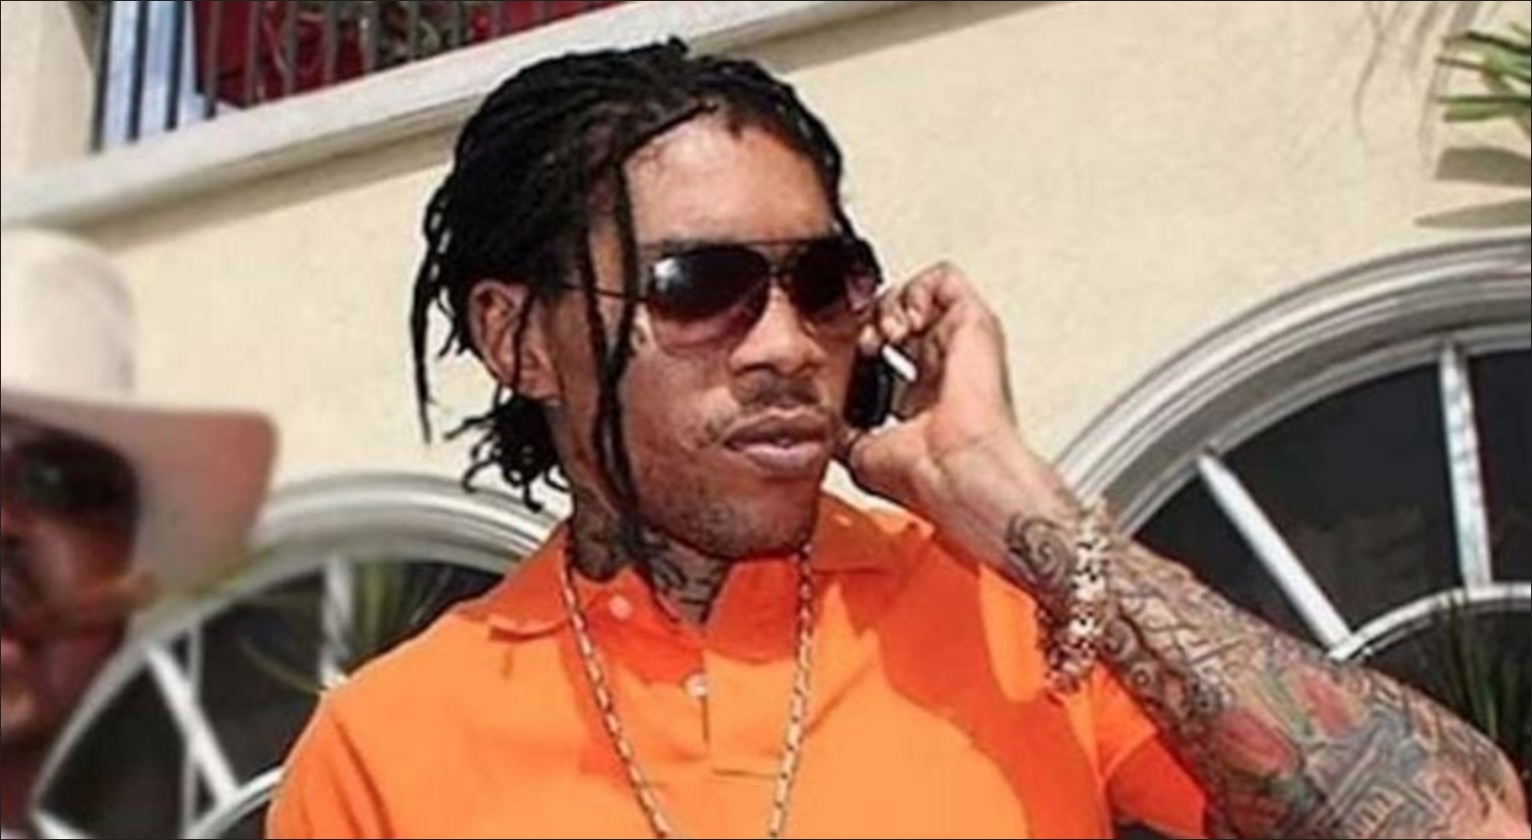 Vybz Kartel Continues To Release Music From Prison – Investigation Launched – YARDHYPE